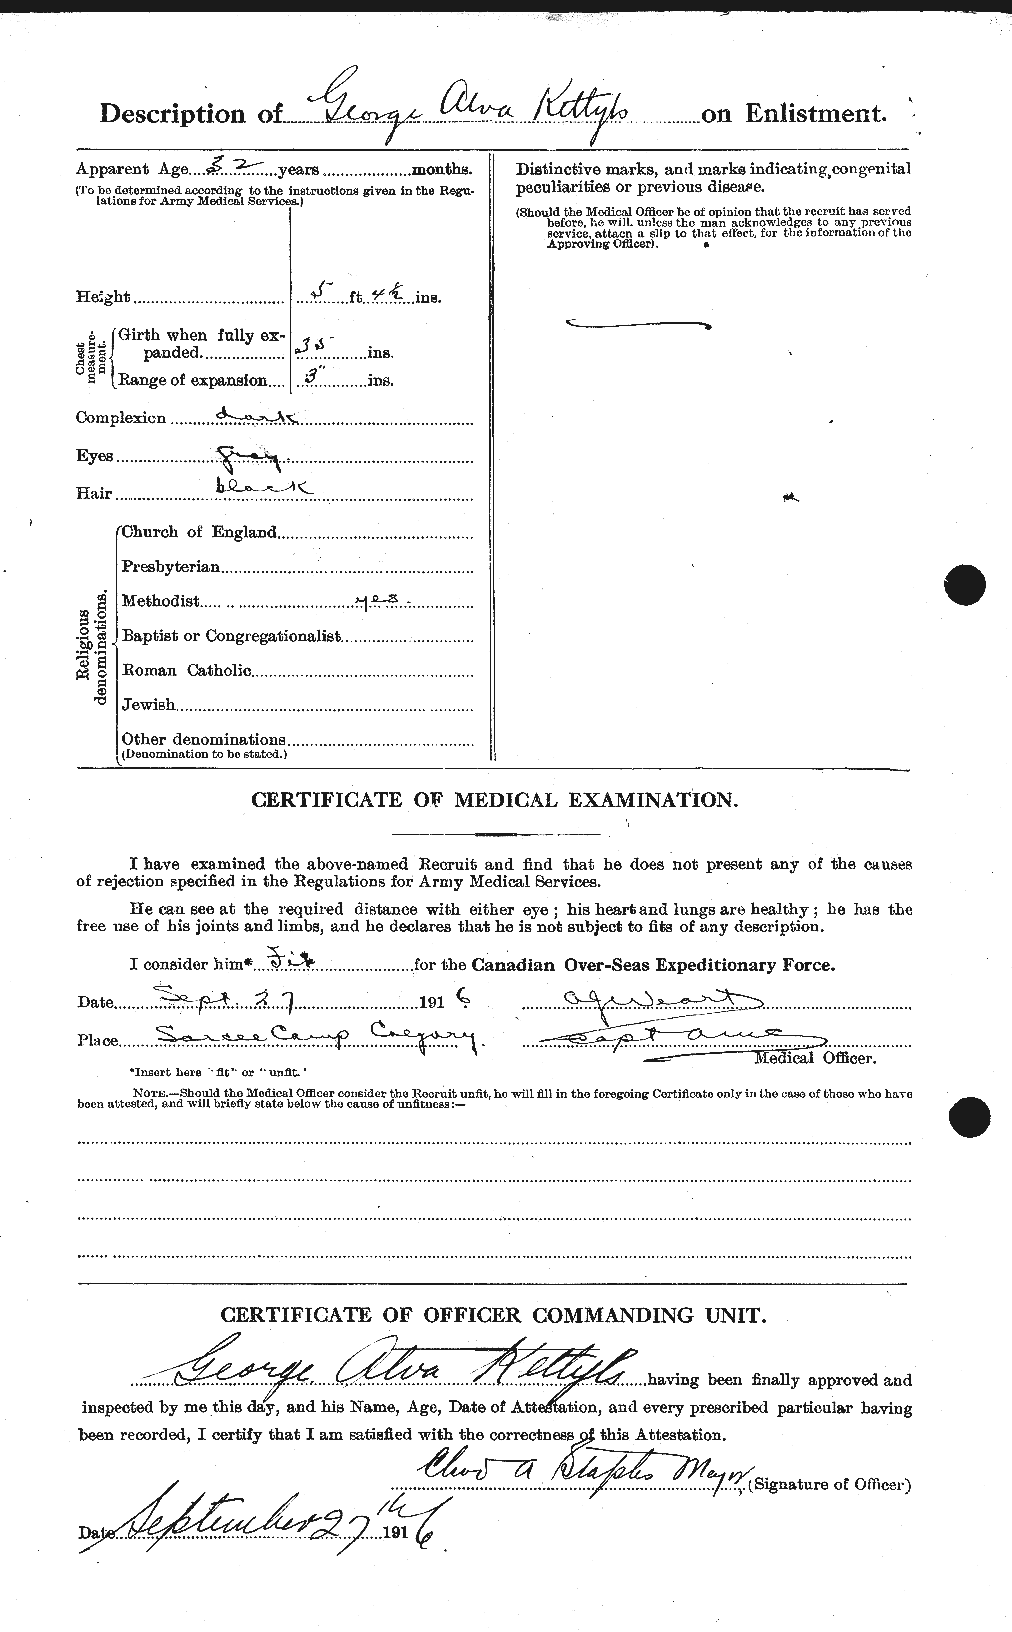 Personnel Records of the First World War - CEF 436424b